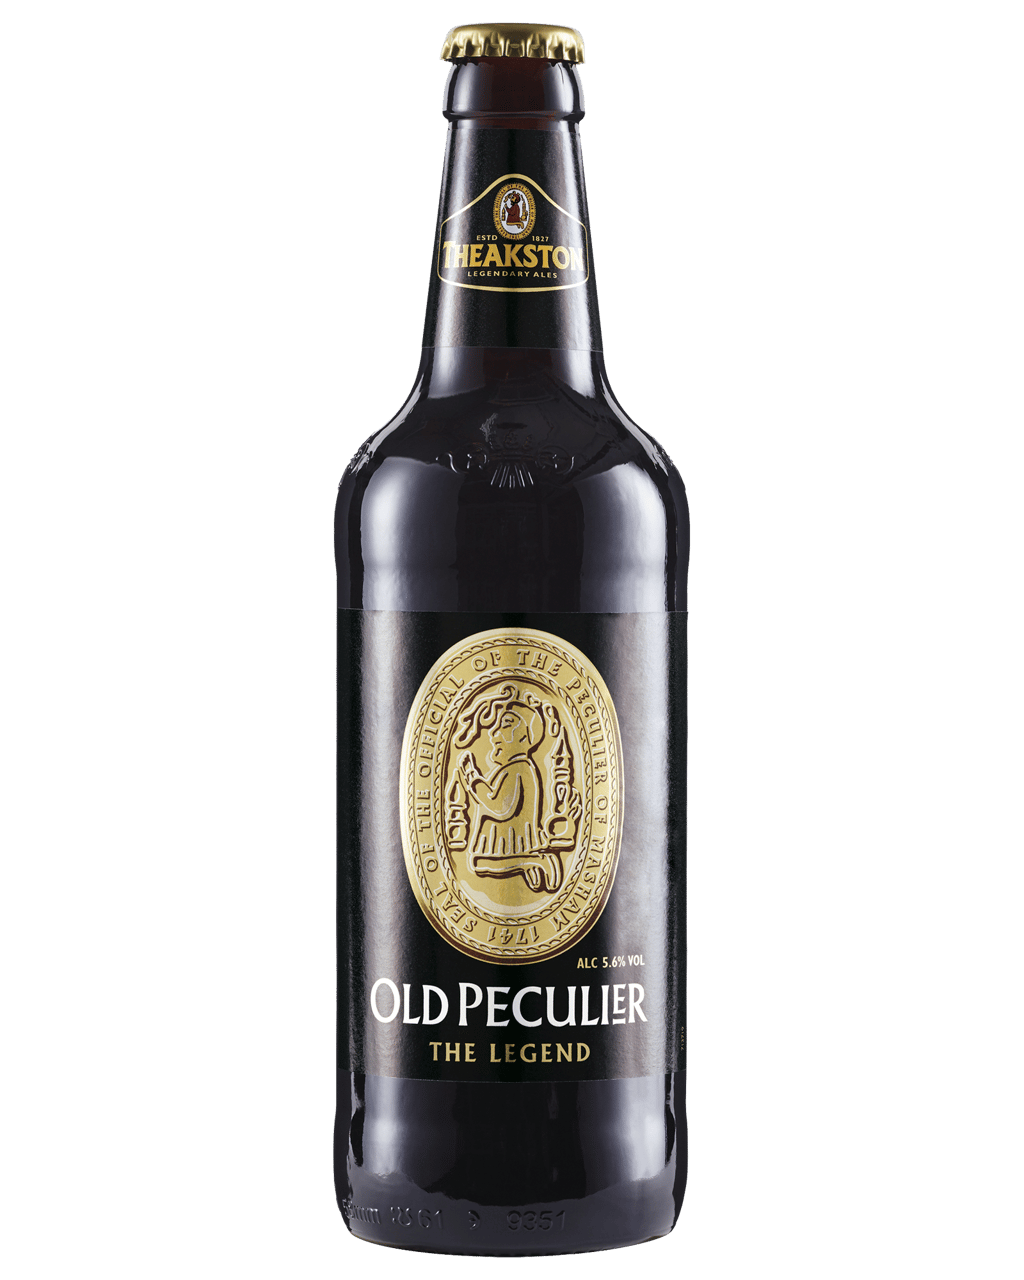 Theakstons Old Peculier